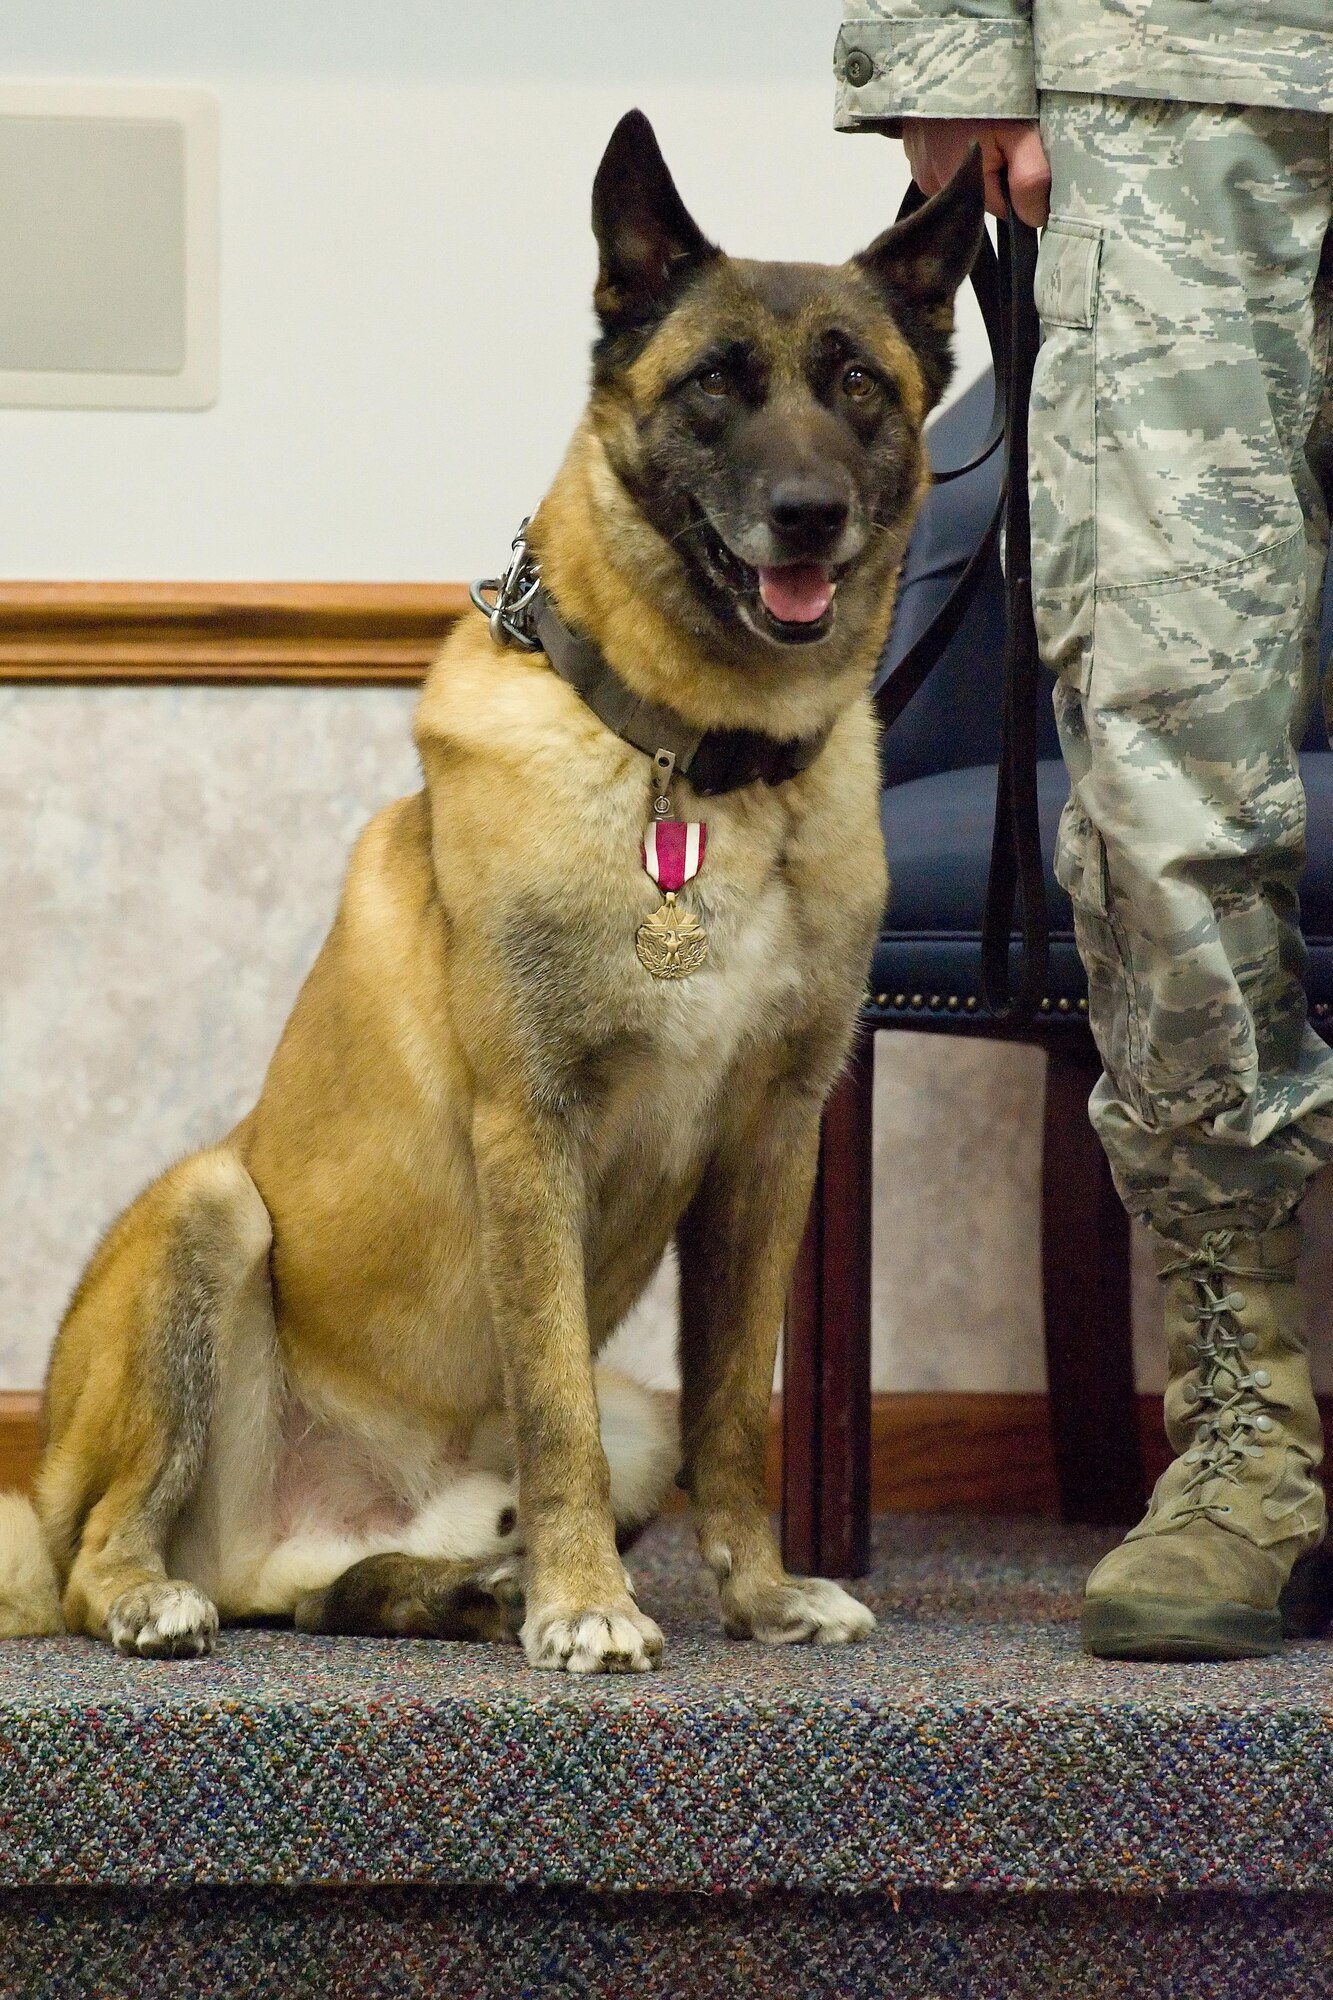 Military Working Dog Cuervo, N622, assigned to the 436th Airlift Wing, 436th Security Forces Squadron, was presented the U.S. Air Force Meritorious Service Medal during his retirement ceremony April 14, 2017, on Dover Air Force Base, Del. As a member of the Department of Defense’s MWD Program, Cuervo entered the Air Force on Sept. 21, 2009 and spent more than seven years on active duty. (U.S. Air Force photo by Roland Balik)